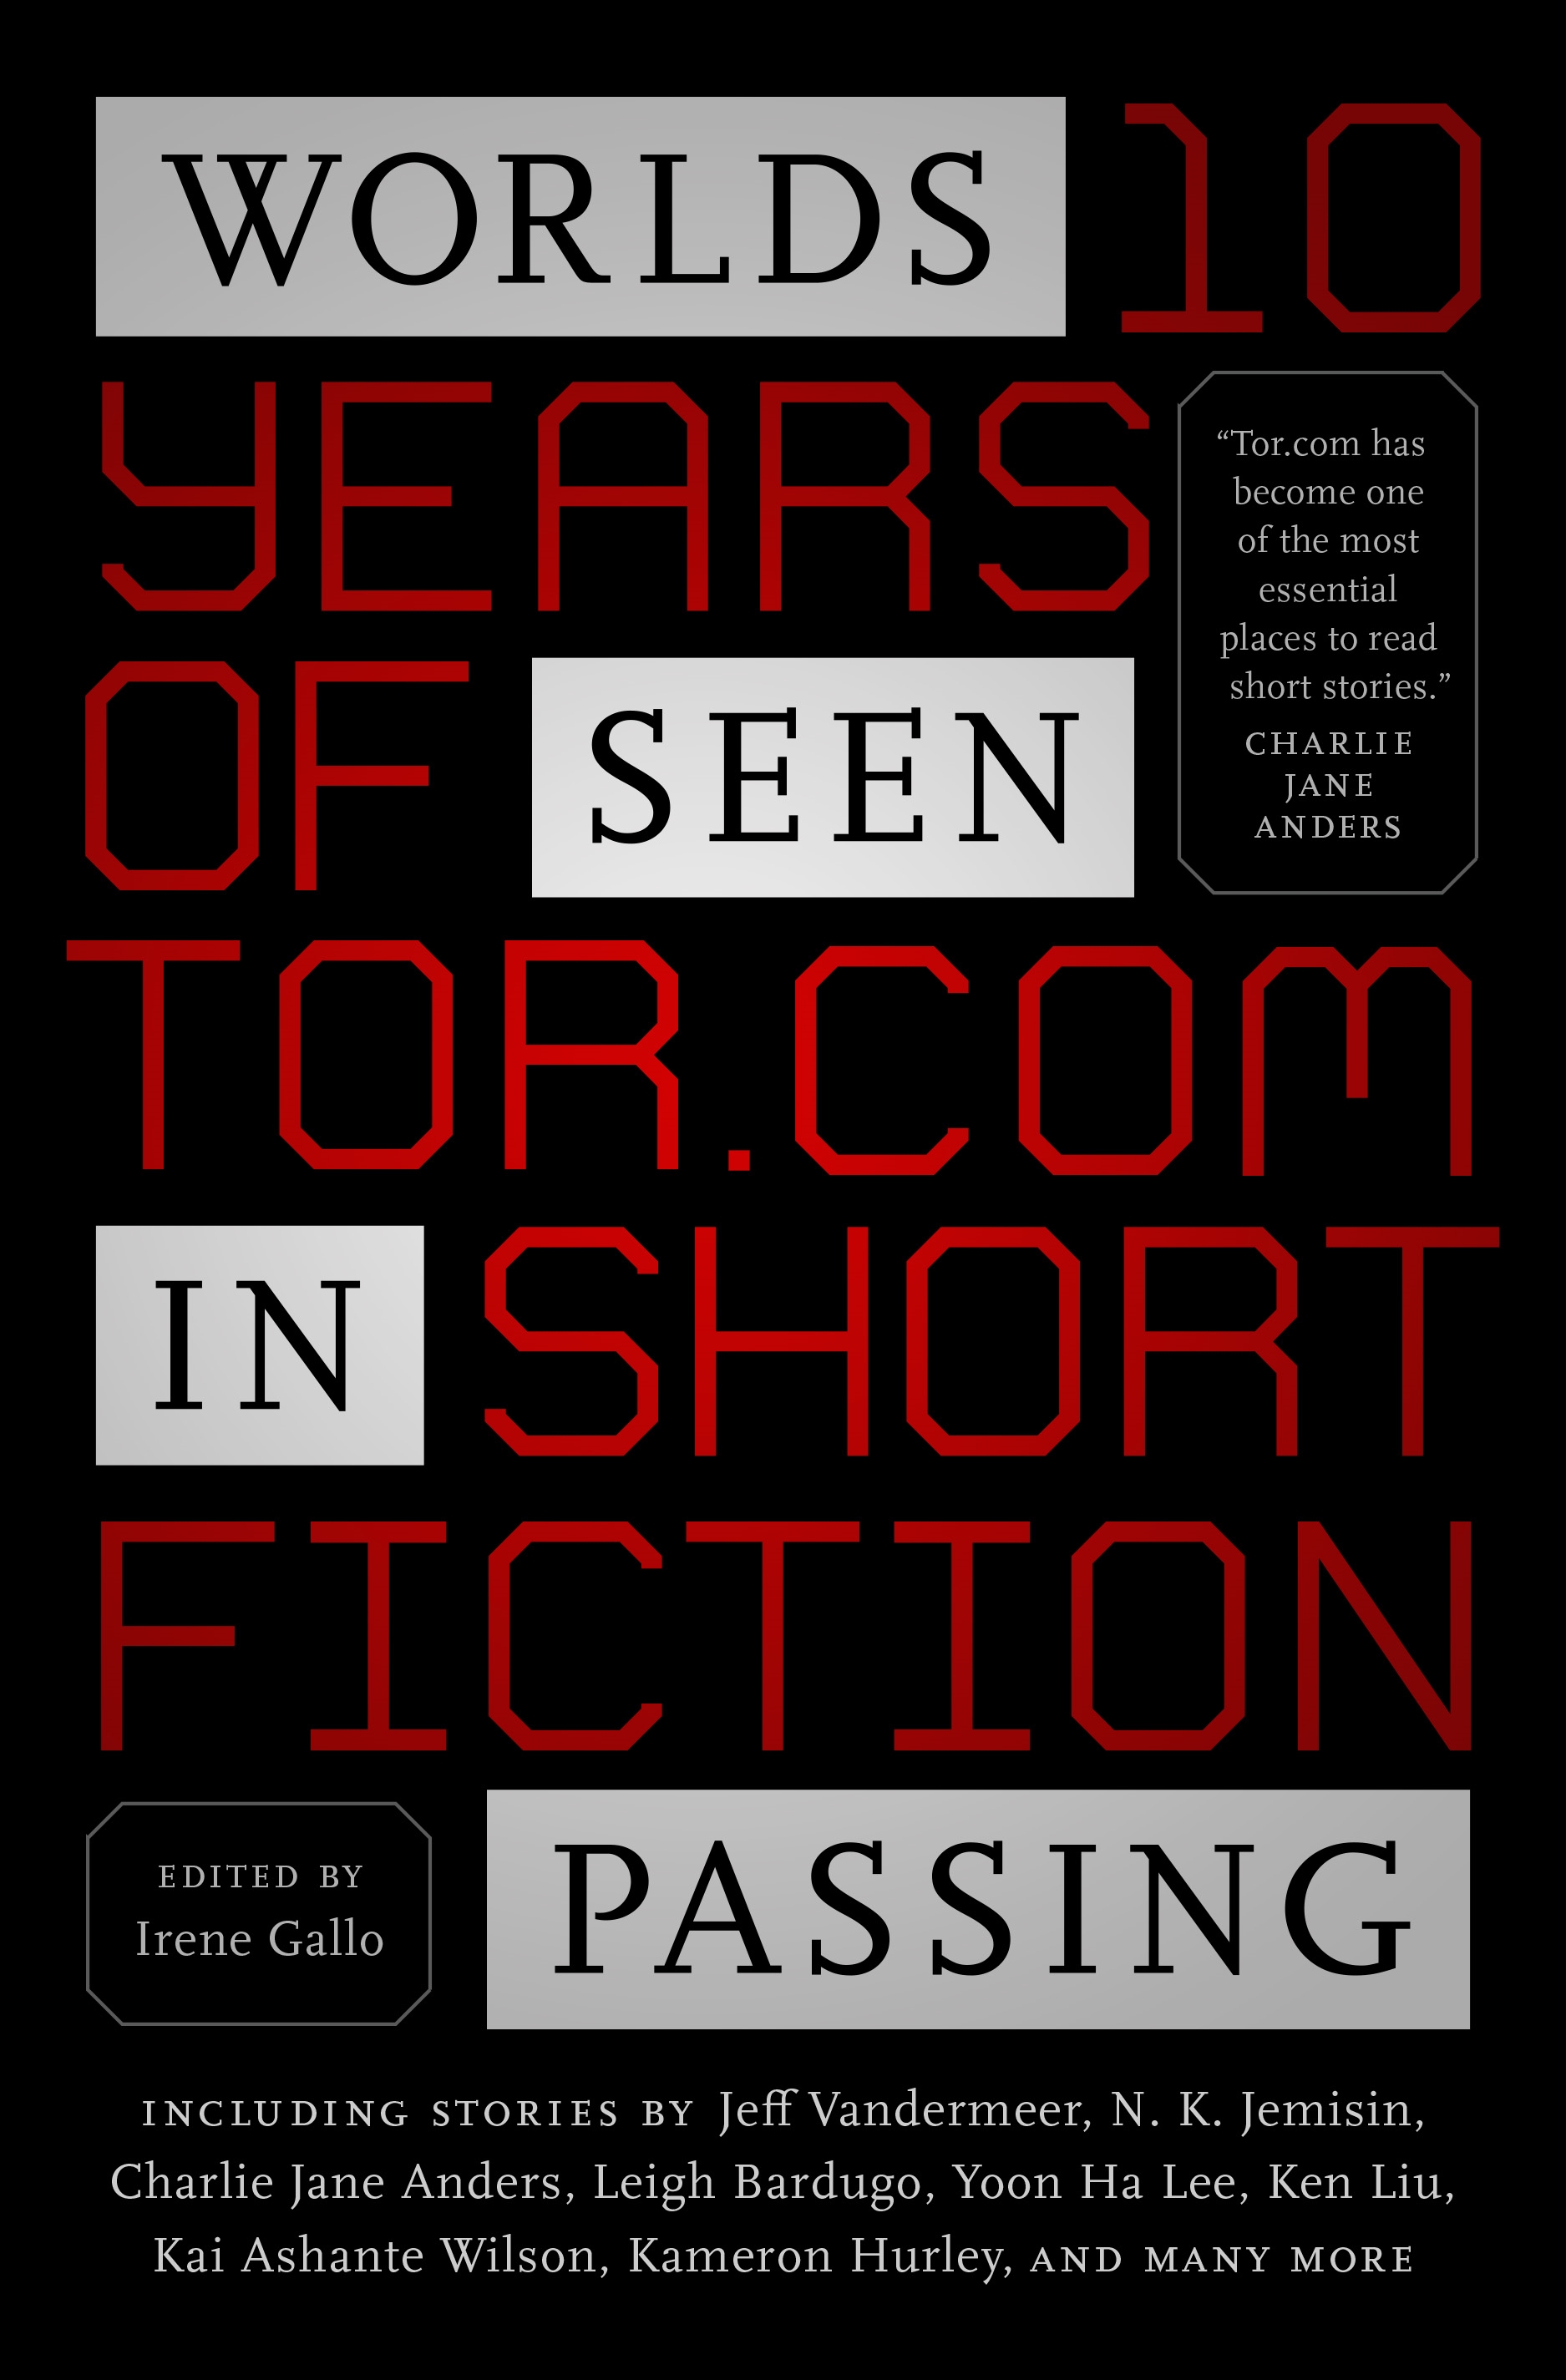 Worlds Seen in Passing : Ten Years of Tor.com Short Fiction by Irene Gallo